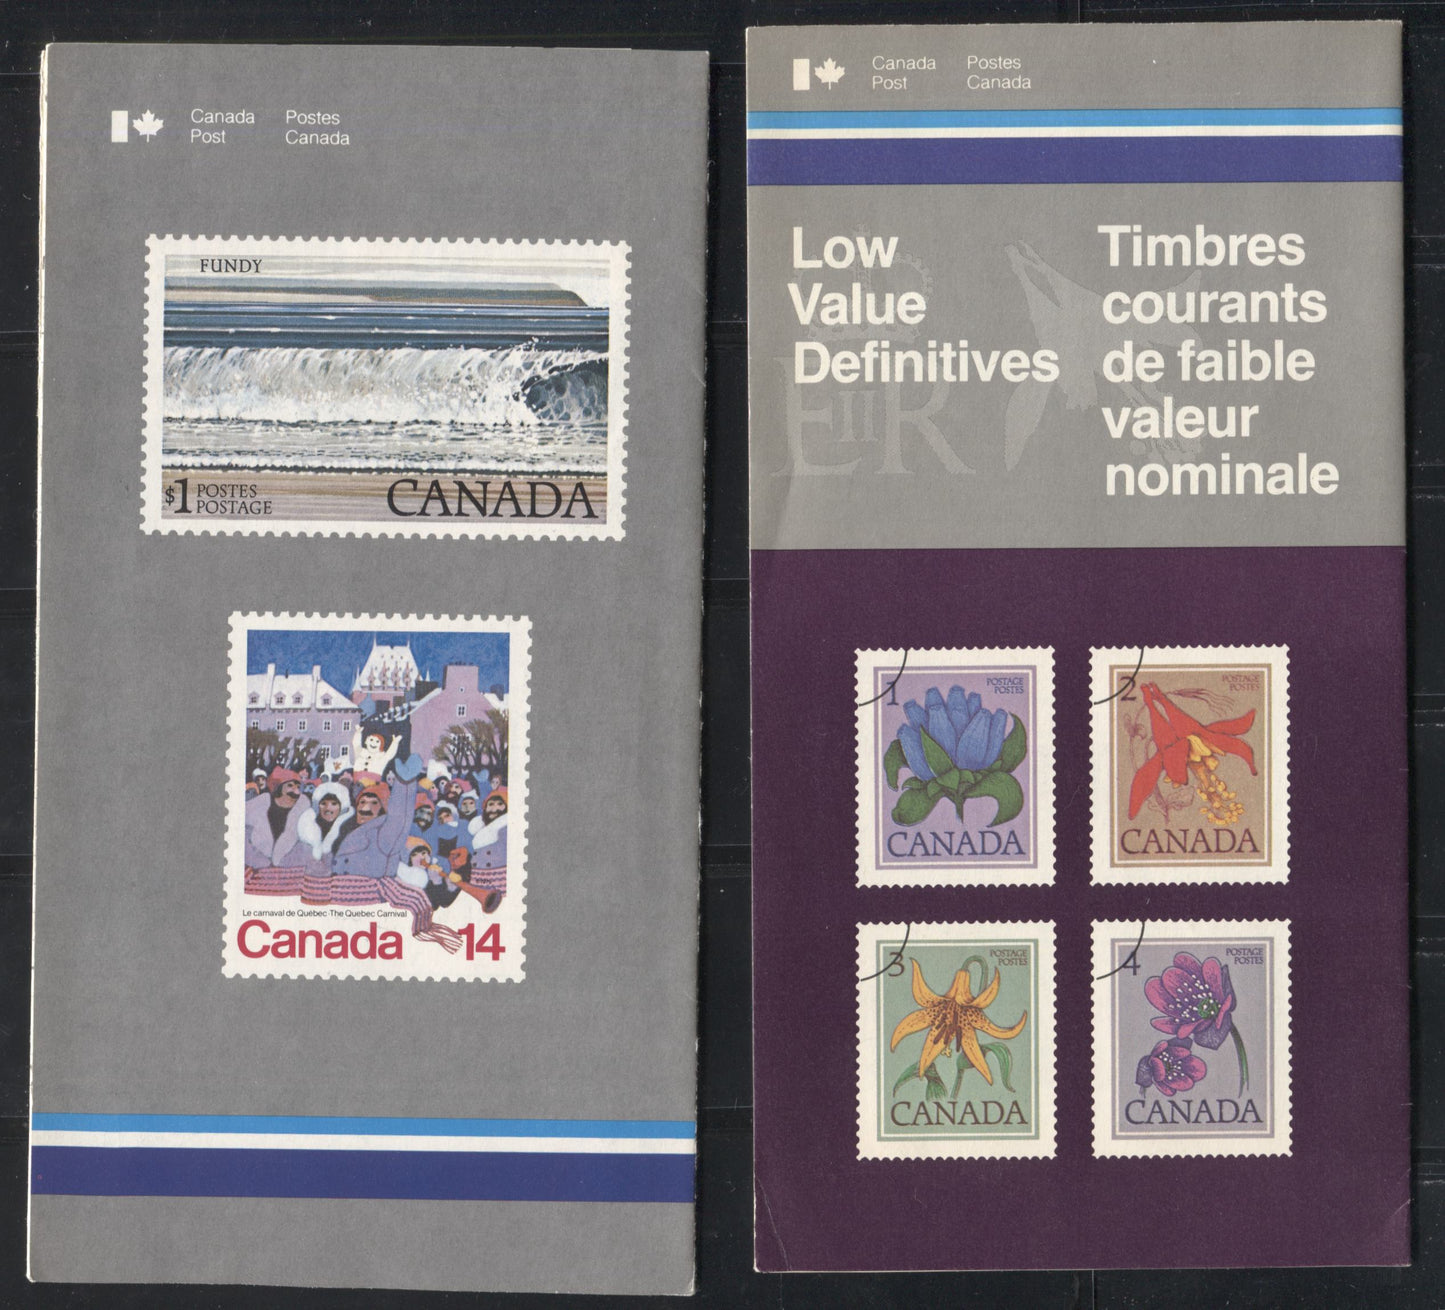 1977-1982 Environment Issue Stamp Pamphlet For the First Issue of Low, Middle And High Value Stamps